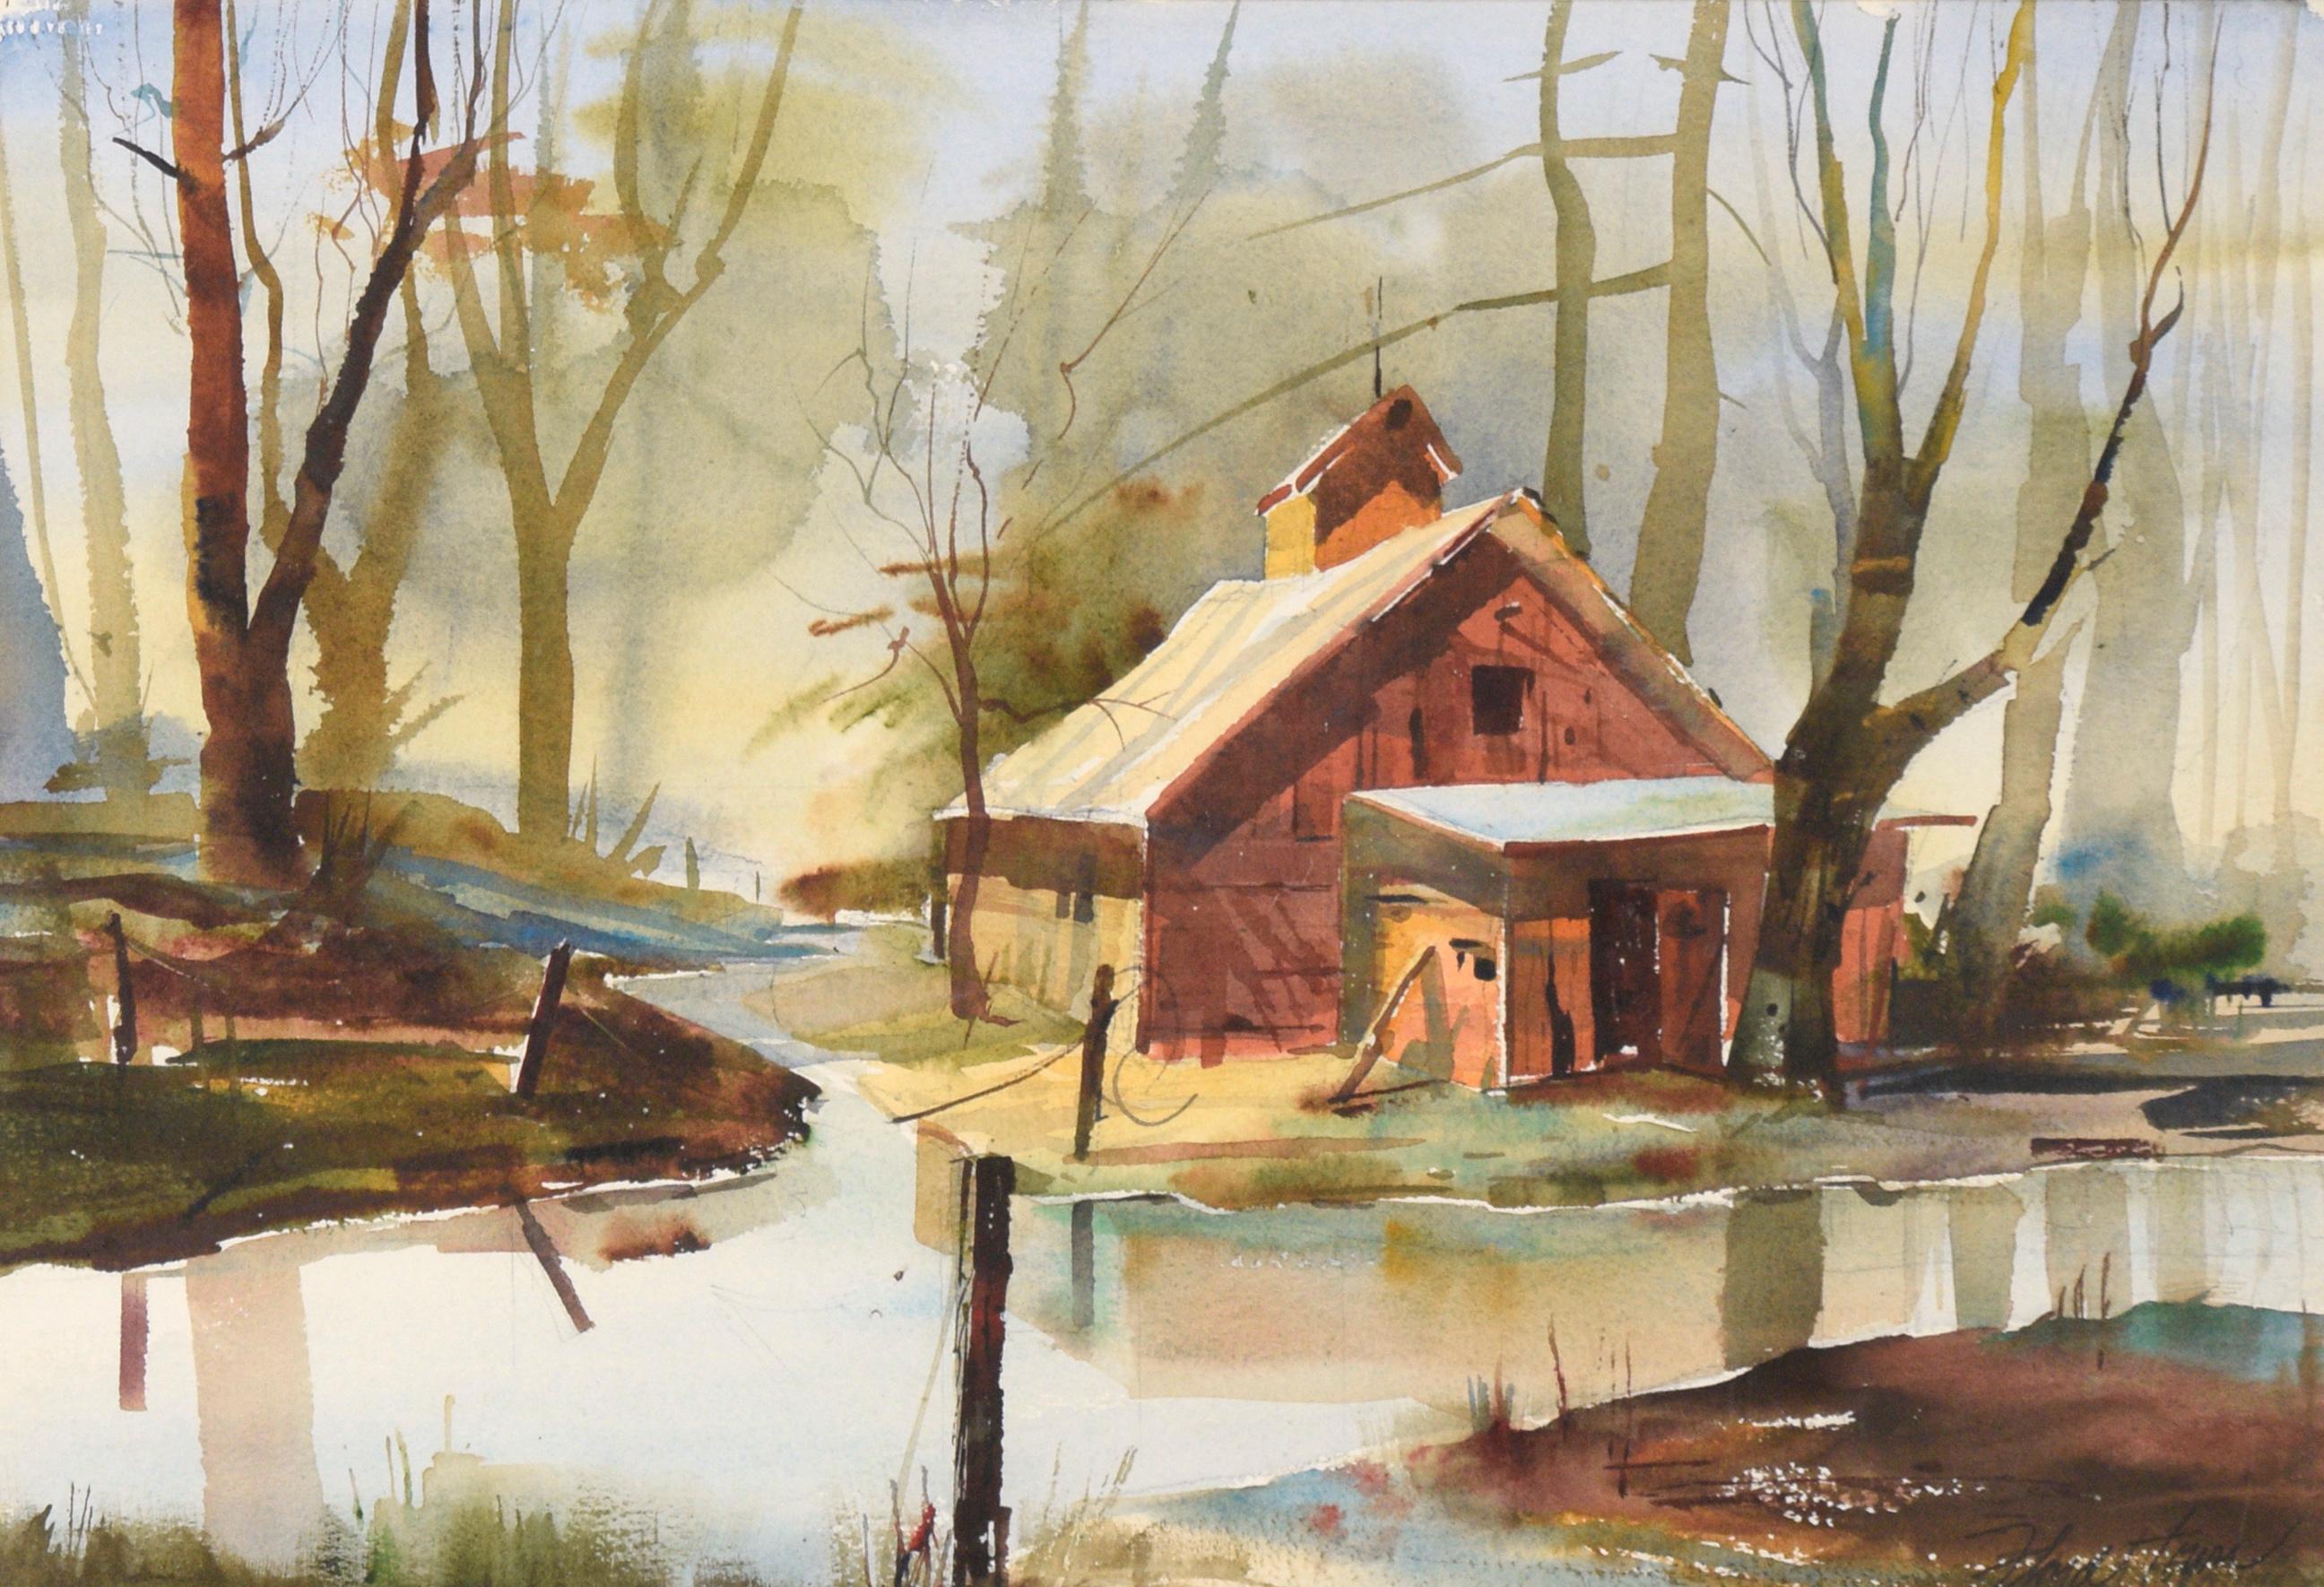 The Fishing Shack, Landscape Watercolor - Art by Floyd Town